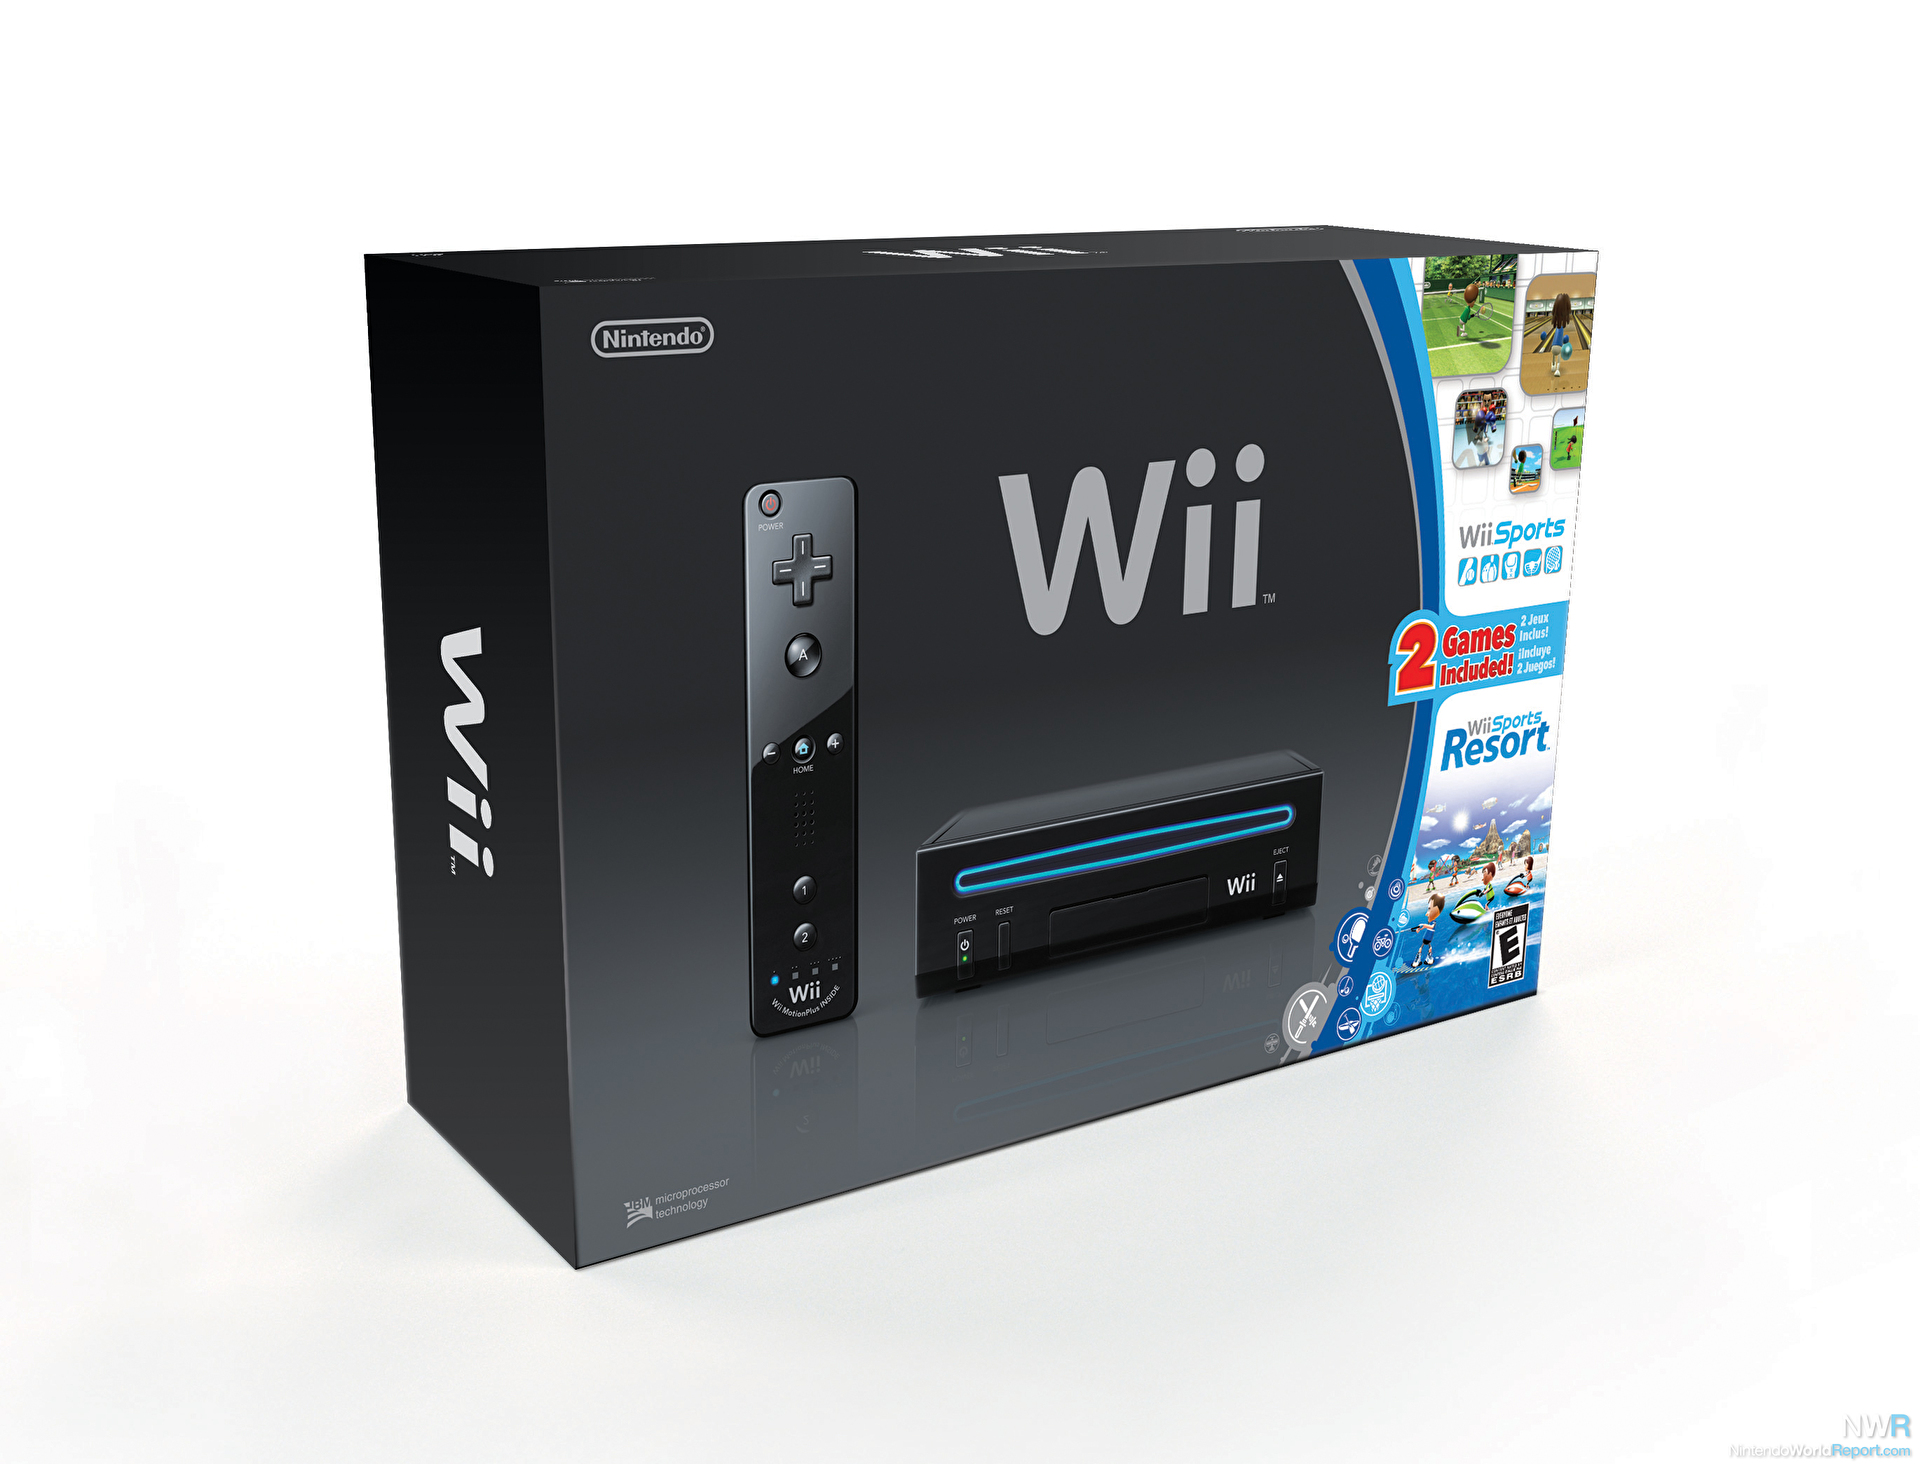 Wii Price Drops to $129.99 - News - Nintendo World Report